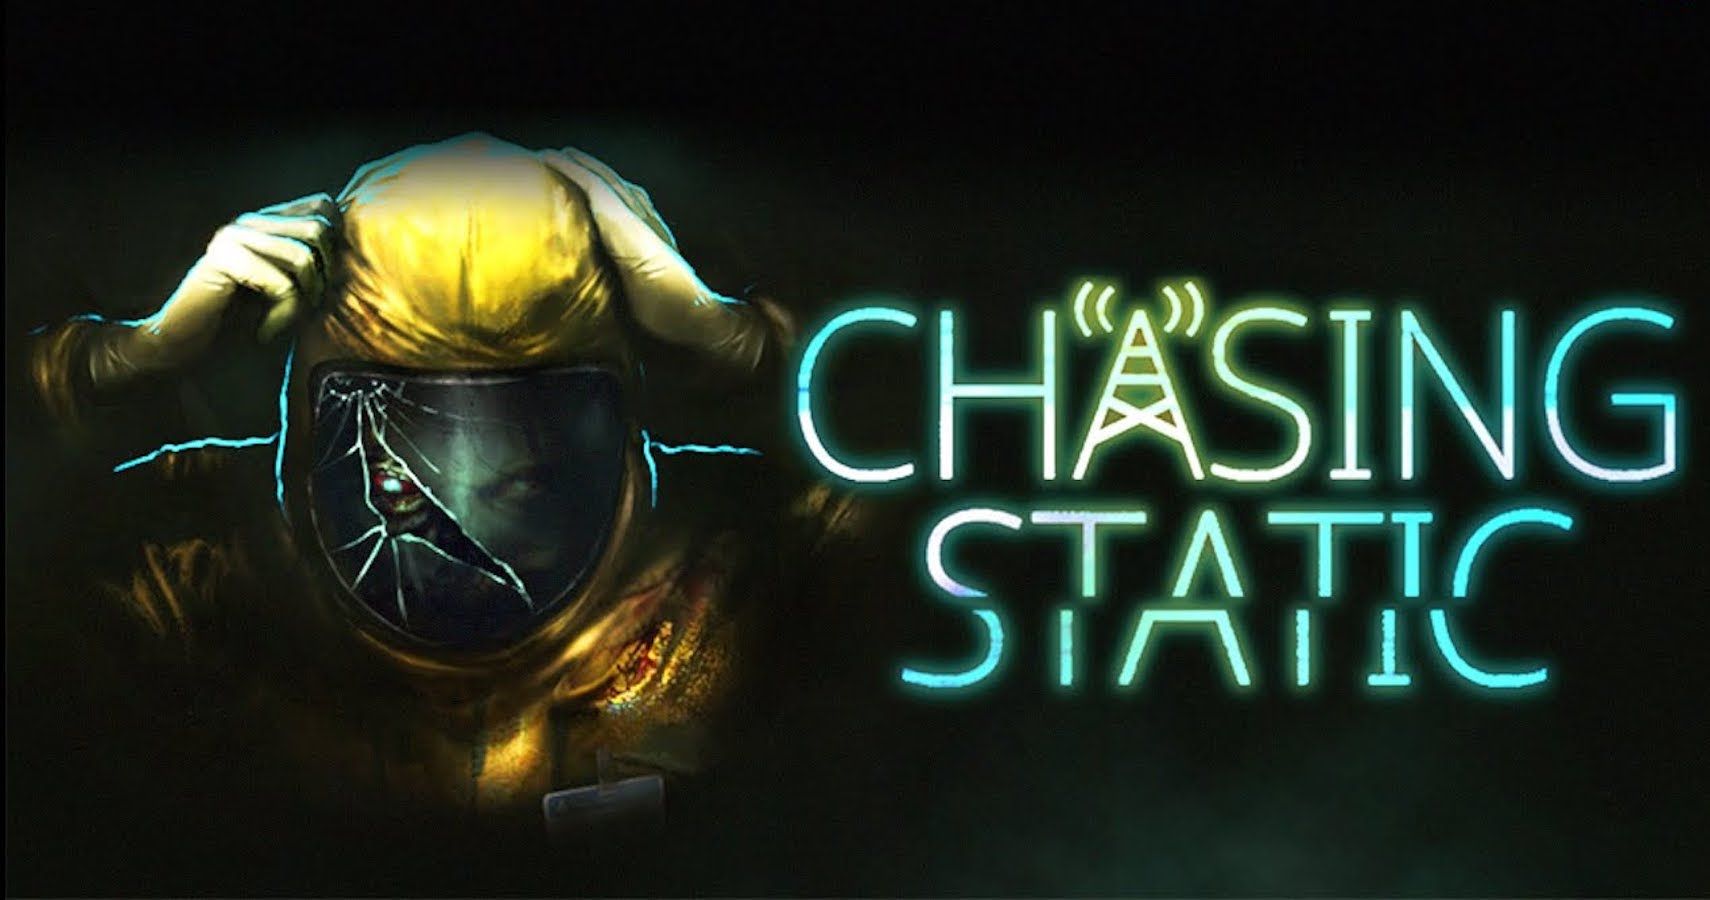 Retro Inspired Horror Game Chasing Static Launches on Consoles PC In Q3 2021